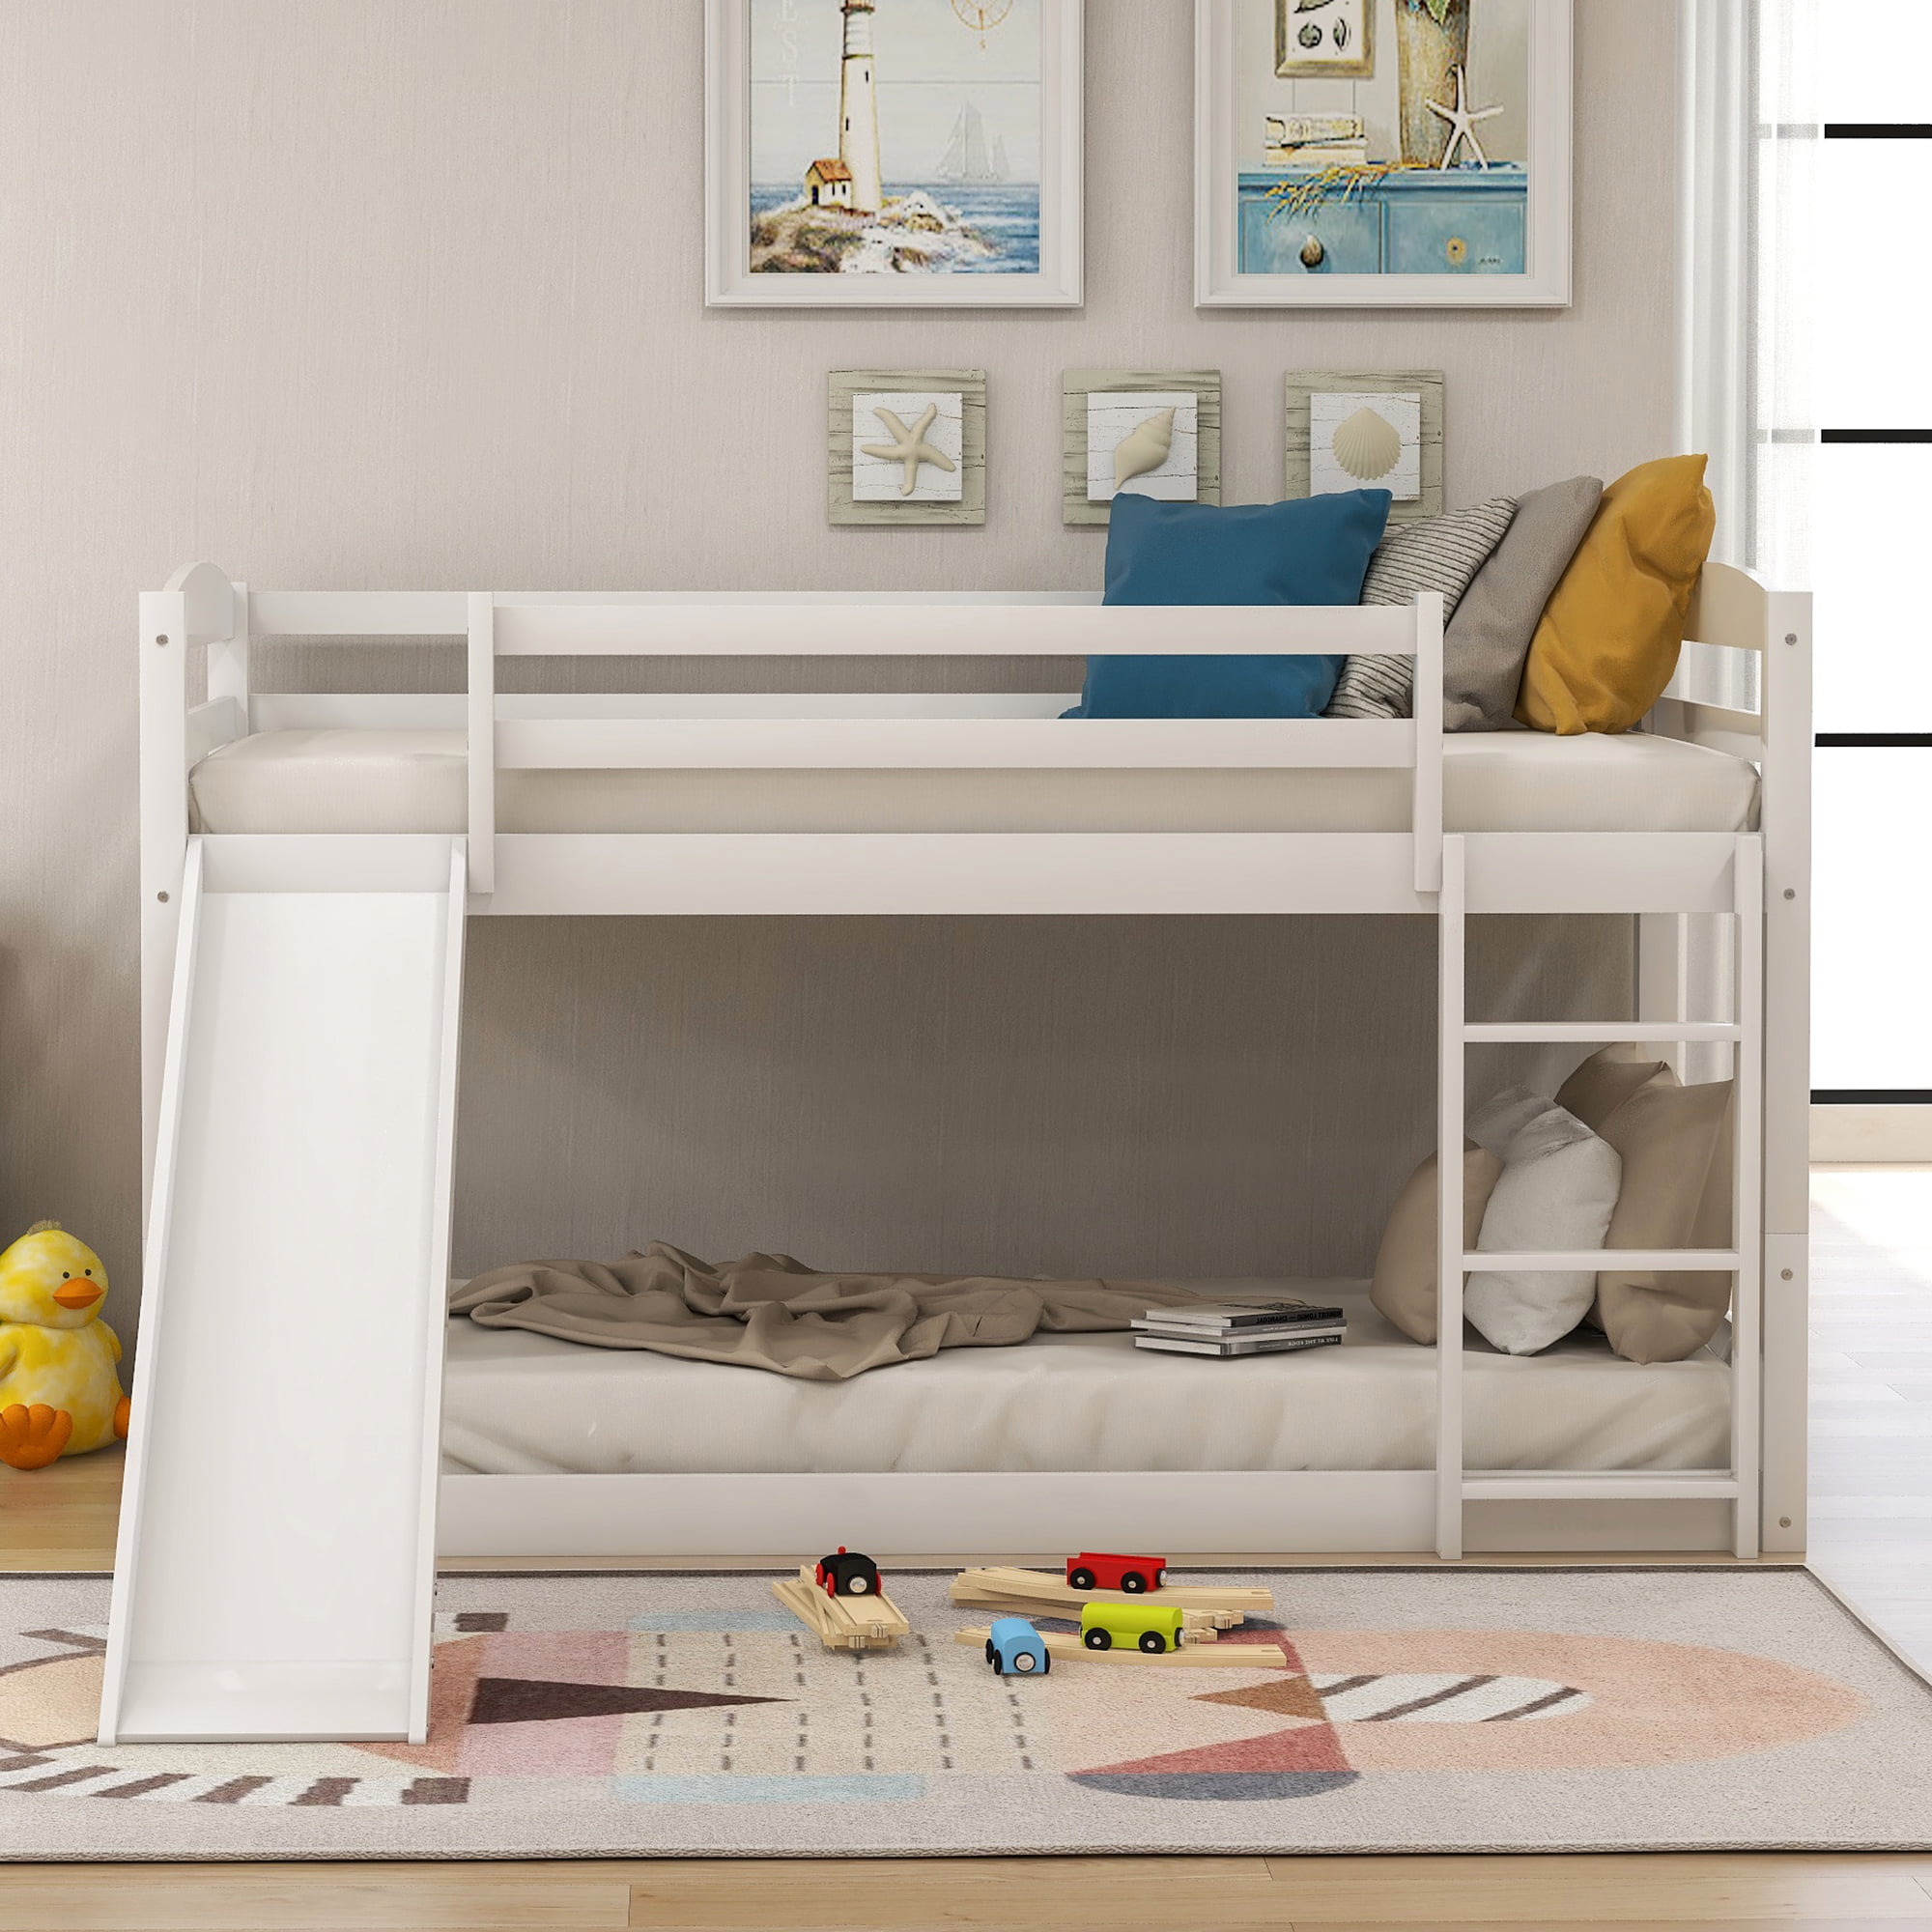 Solid Wood Low Bunk Beds For Kids, Wooden Bunk Beds That Separate